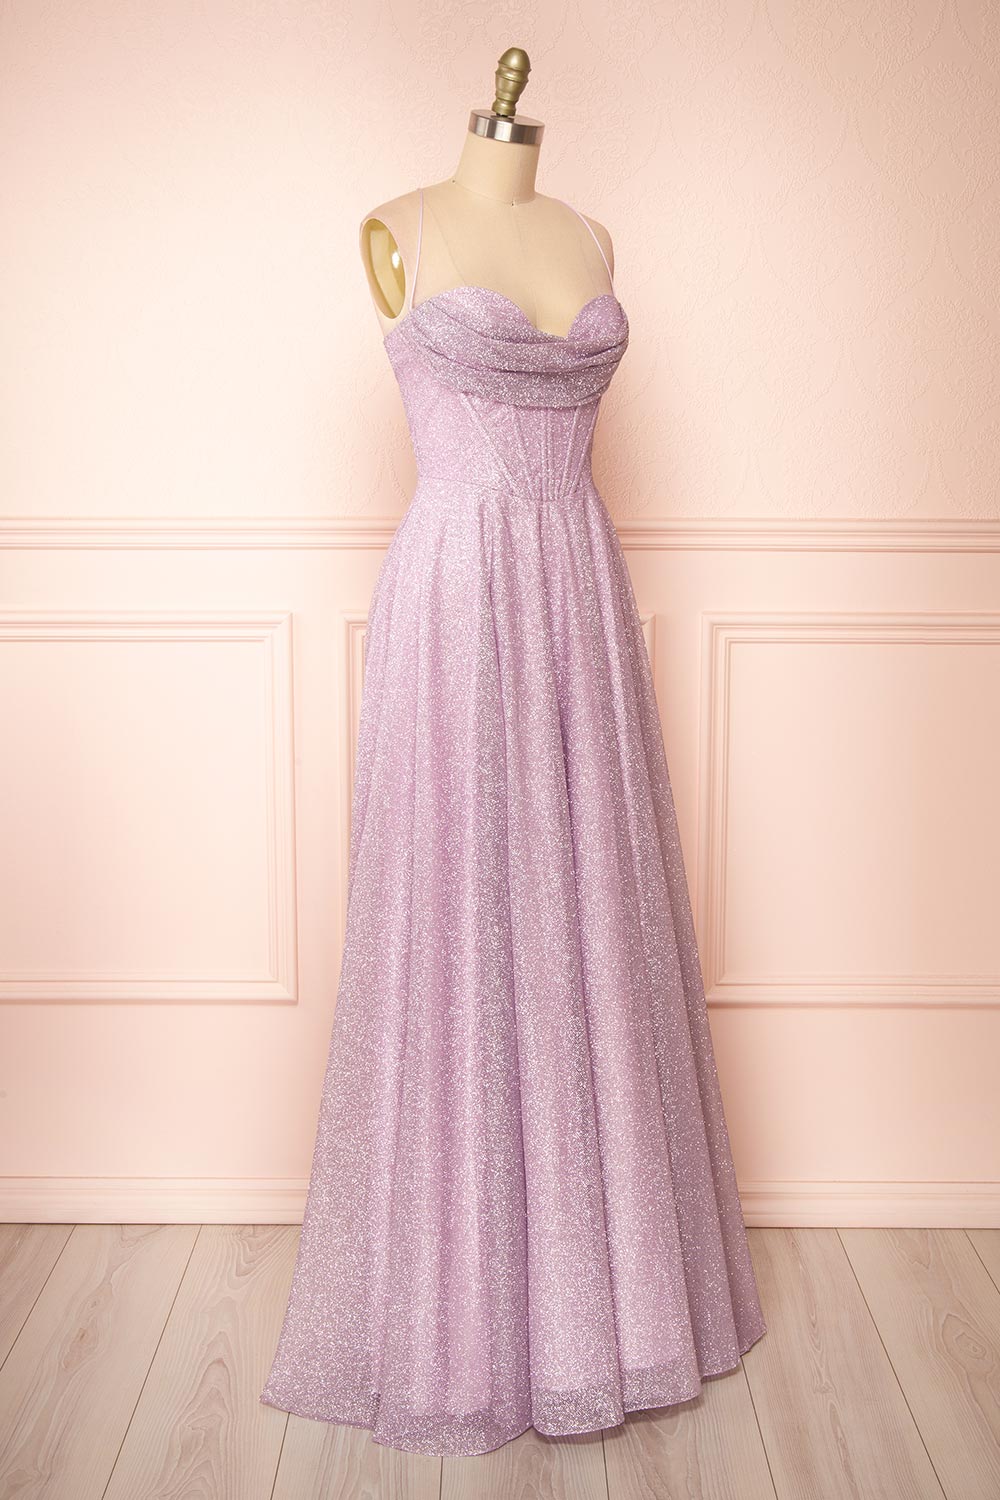 Lexy Lilac Sparkly Cowl Neck Maxi Dress | Boutique 1861 side view 